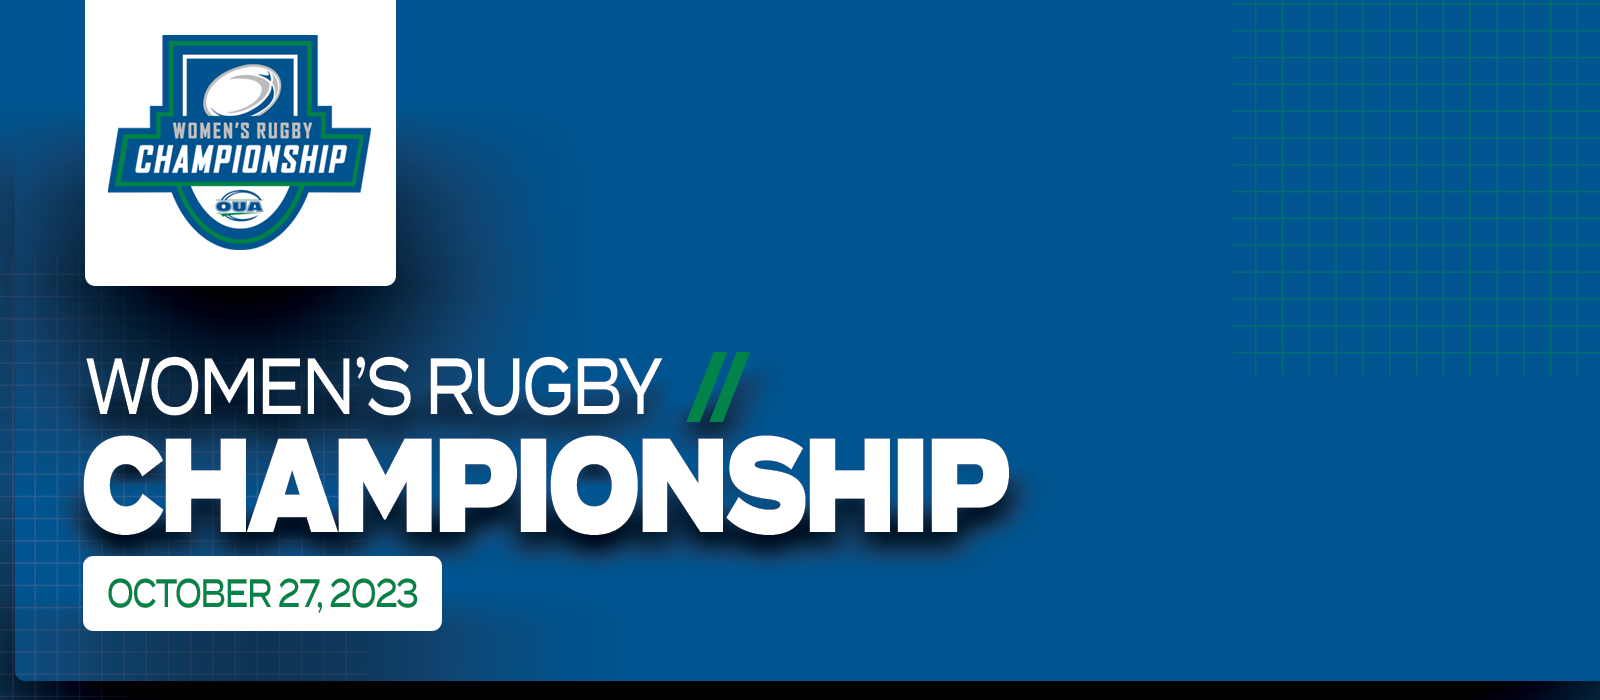 Predominantly blue graphic with large white text on the left side that reads Women’s Rugby Championship, October 27, 2023’ beneath the OUA Women’s Rugby Championship logo